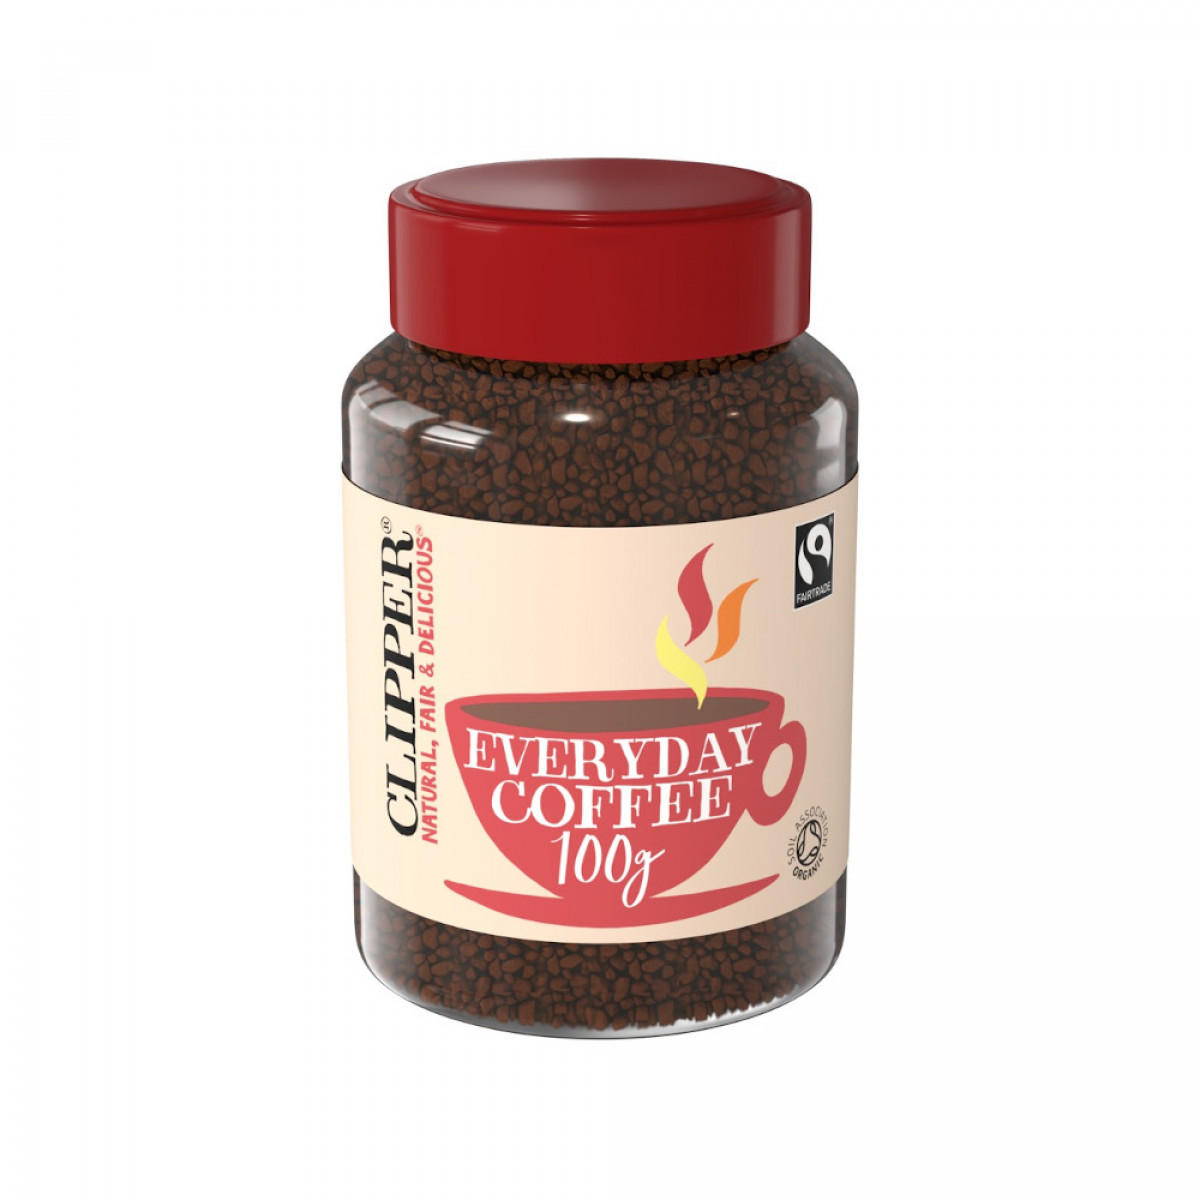 Product picture for Everyday Organic Coffee Granules